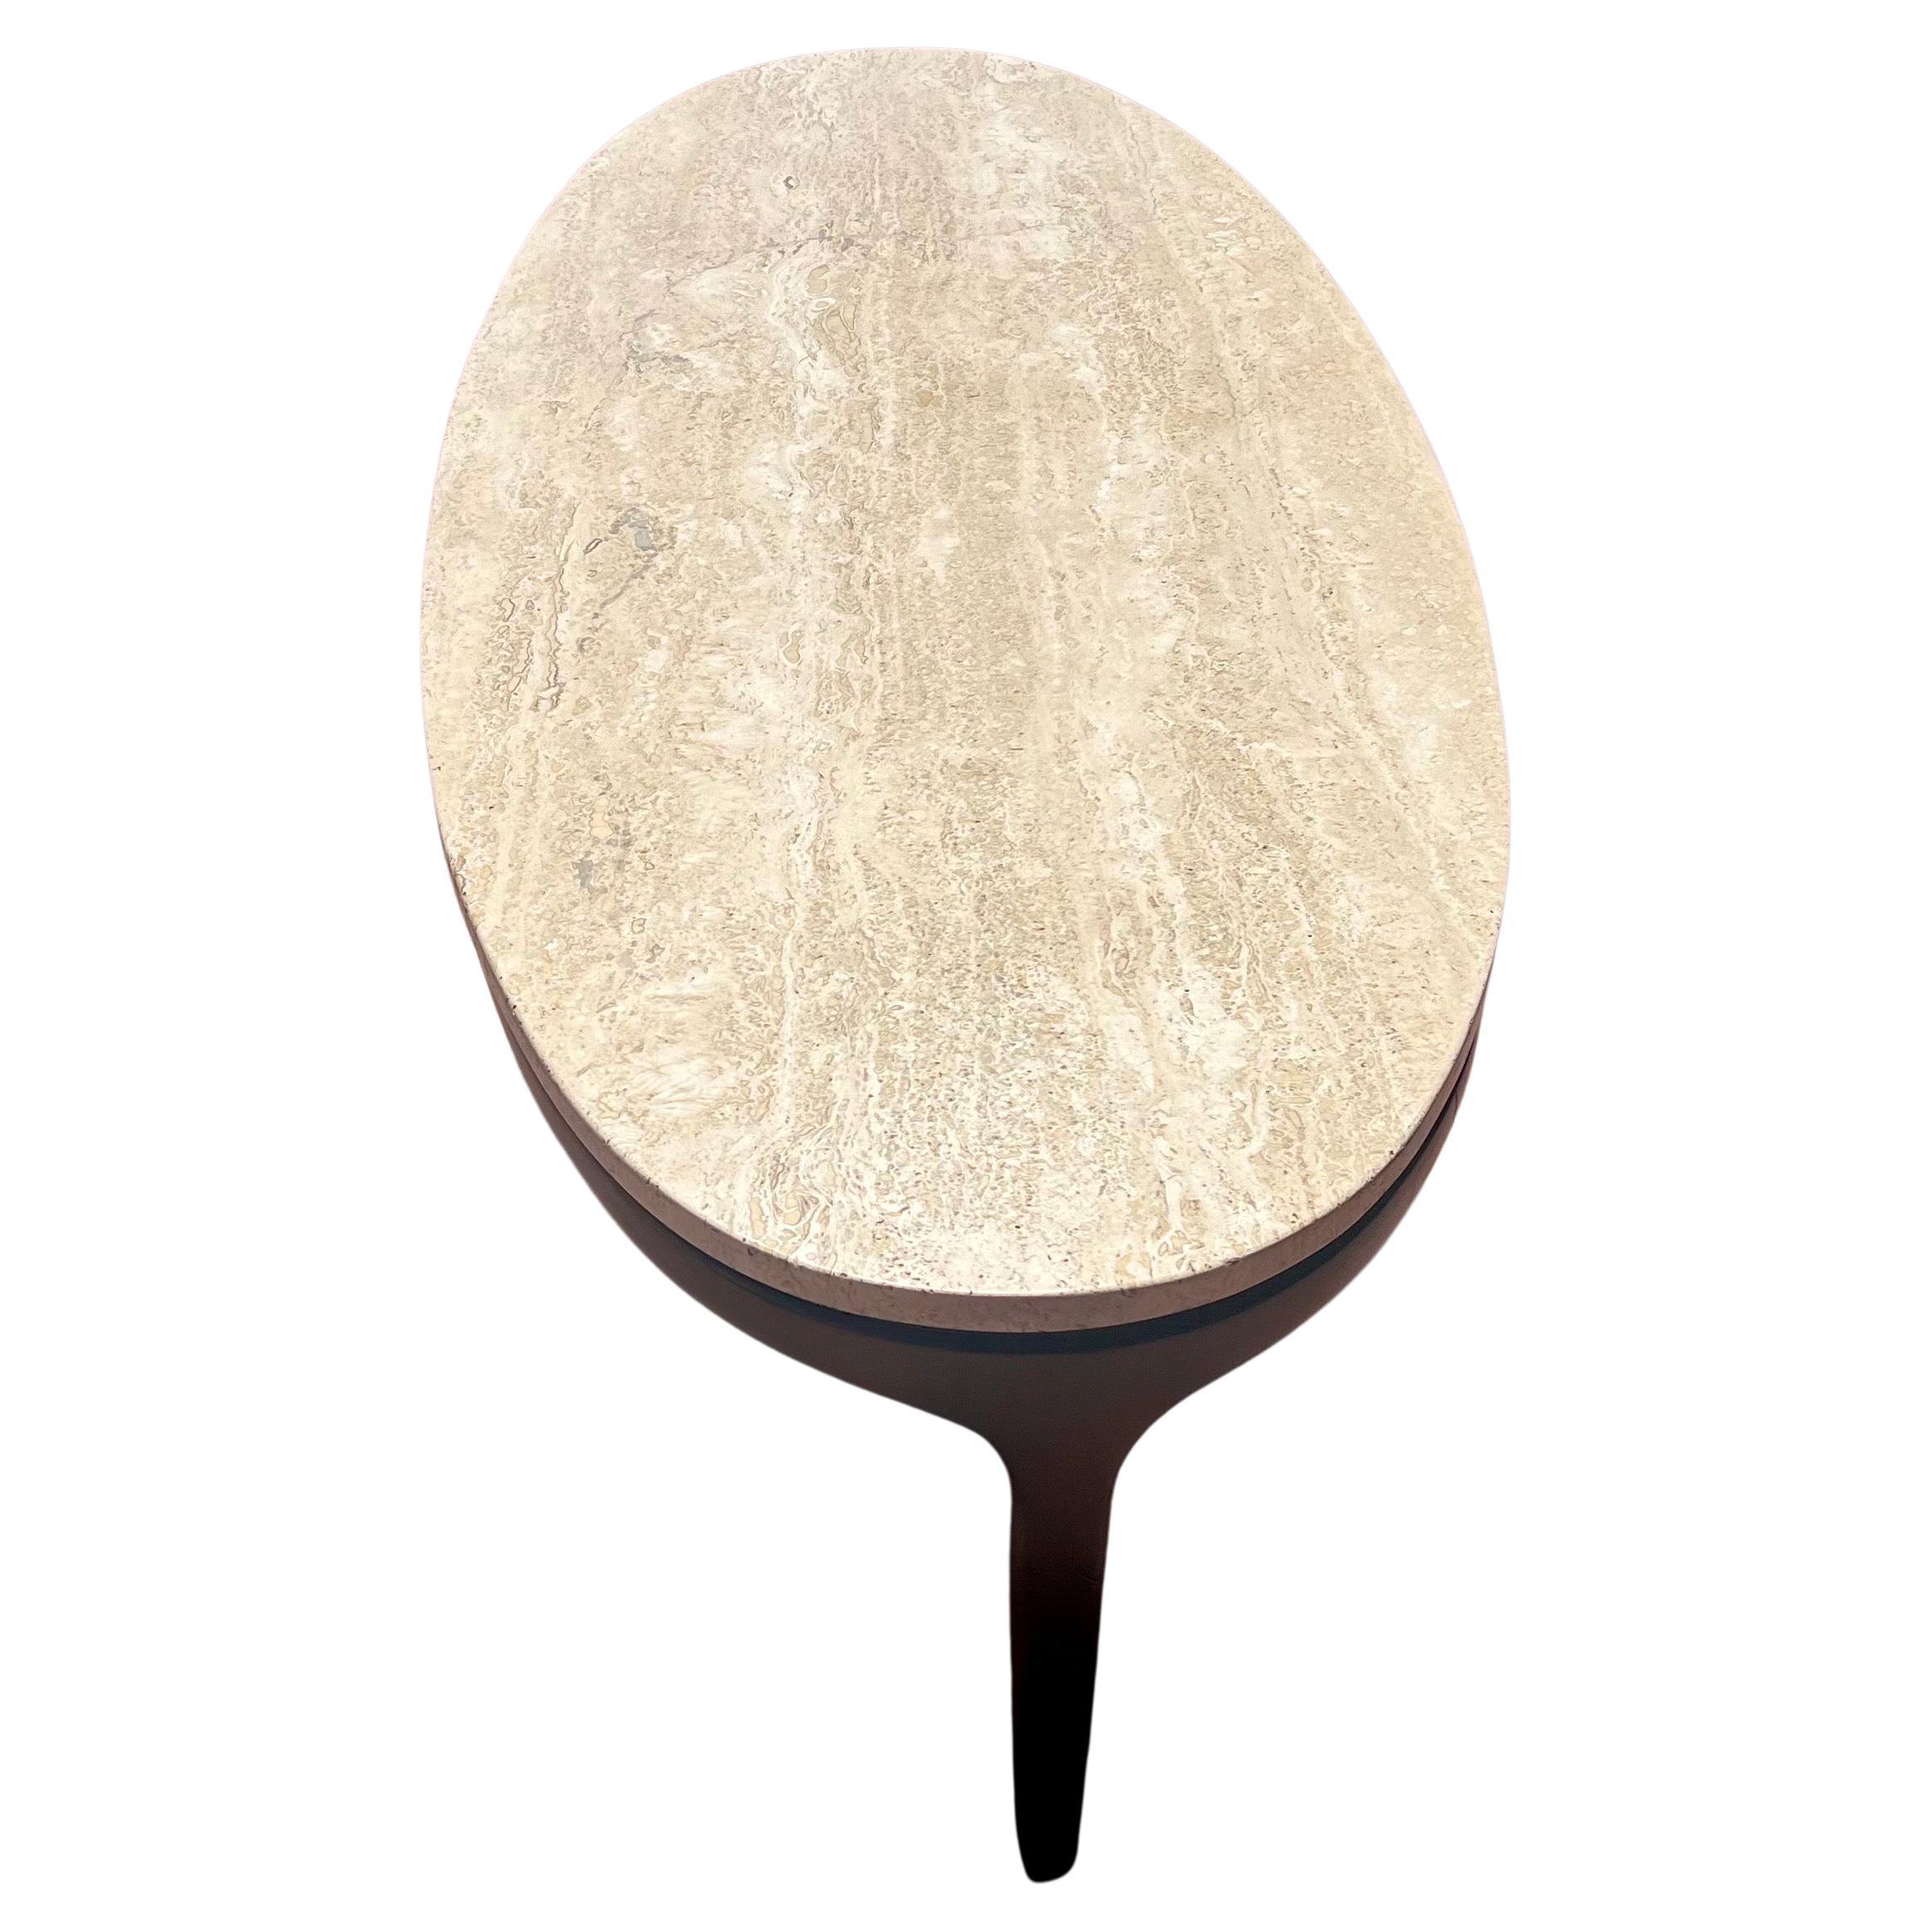 Gorgeous elegant solid wanut base in a dark chocolate finish with a cream color marble oval top , elegant solid surdy , rare piece hard to find a Mid Century Danish Modern Home decor piece.